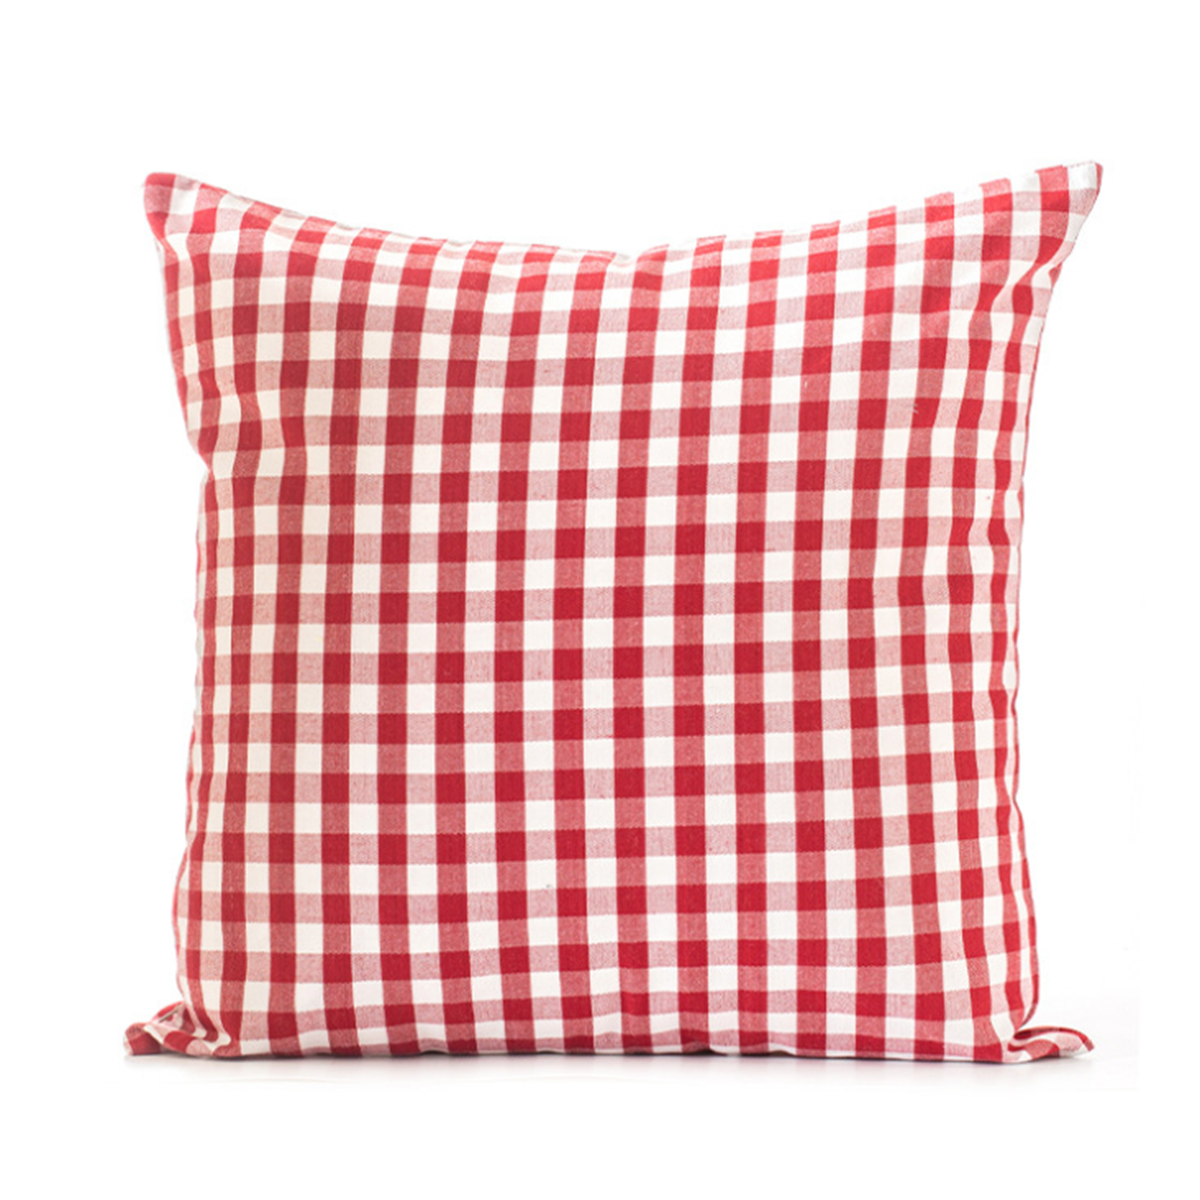 Retro Plaid Throw Pillow Case Cushion Cover 18''x18'' Pillow Protector for Bedroom Couch Sofa Bed Patio Chair Home Car D